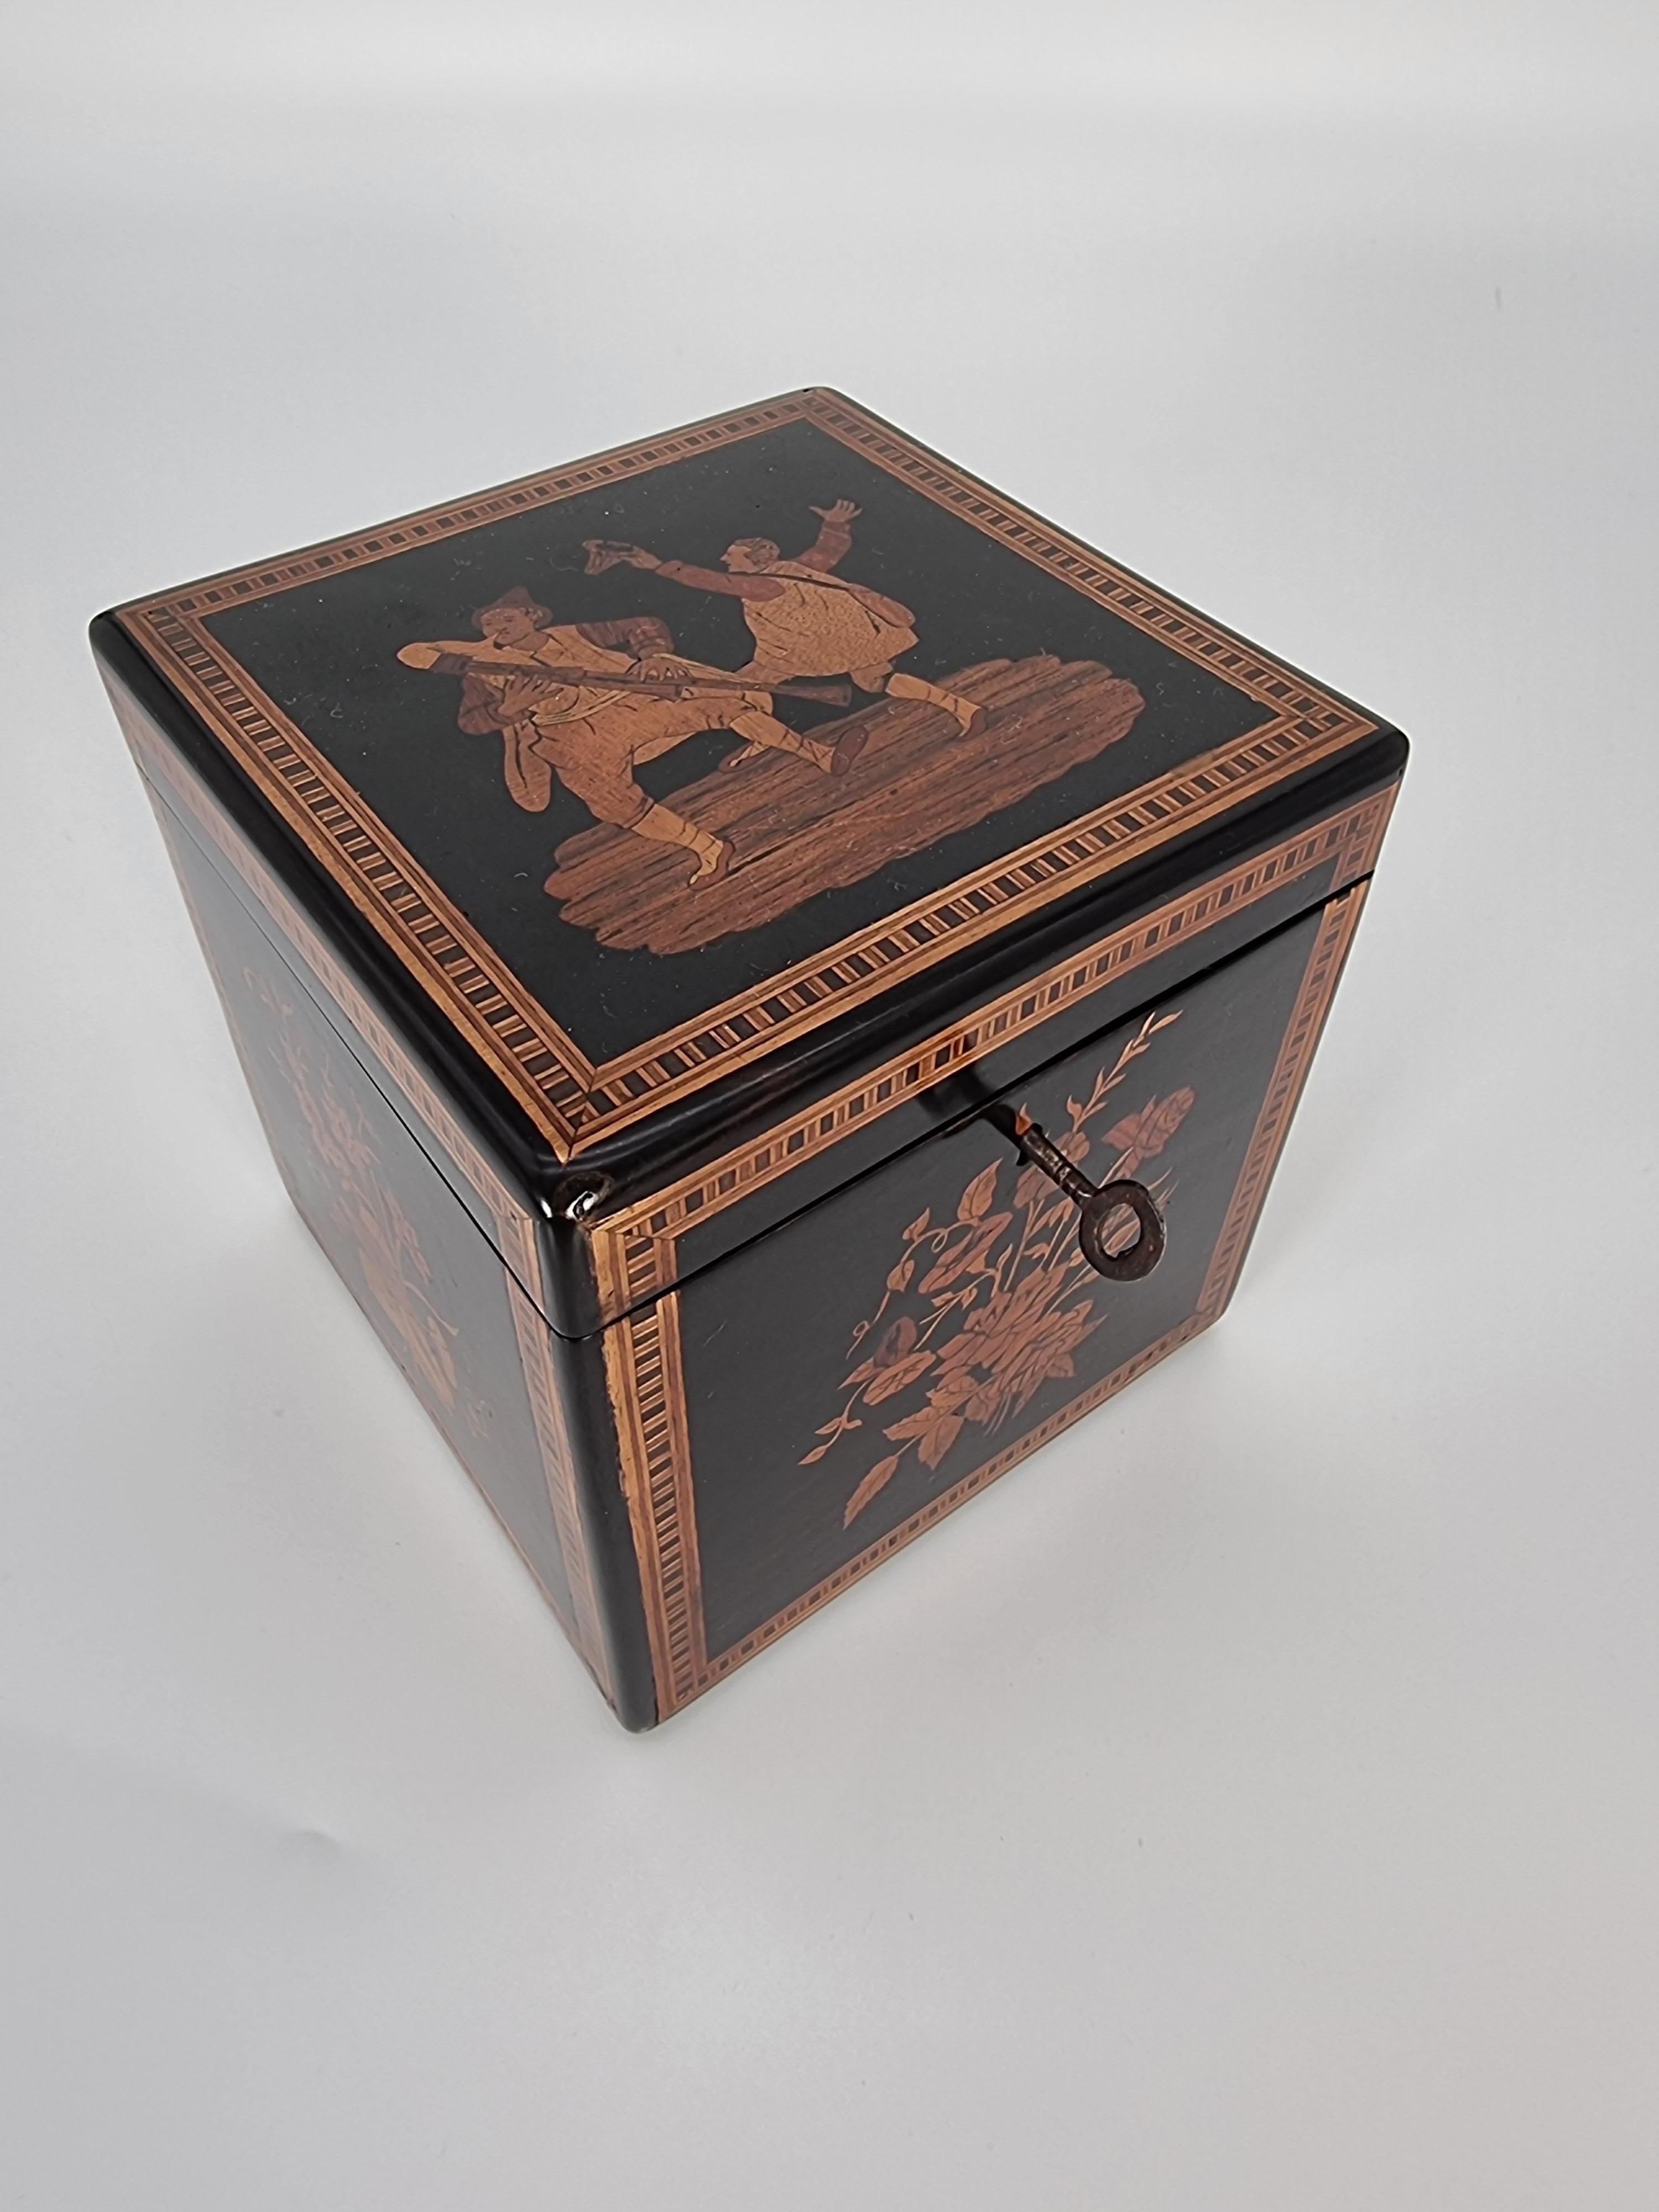 A very fine Italian marquetry box dating to circa 1860 and made in the Sorrento region of Italy where local craftsmen were renowned for making these beautiful fine marquetry objects.

This example is constructed from walnut and veneered in dark